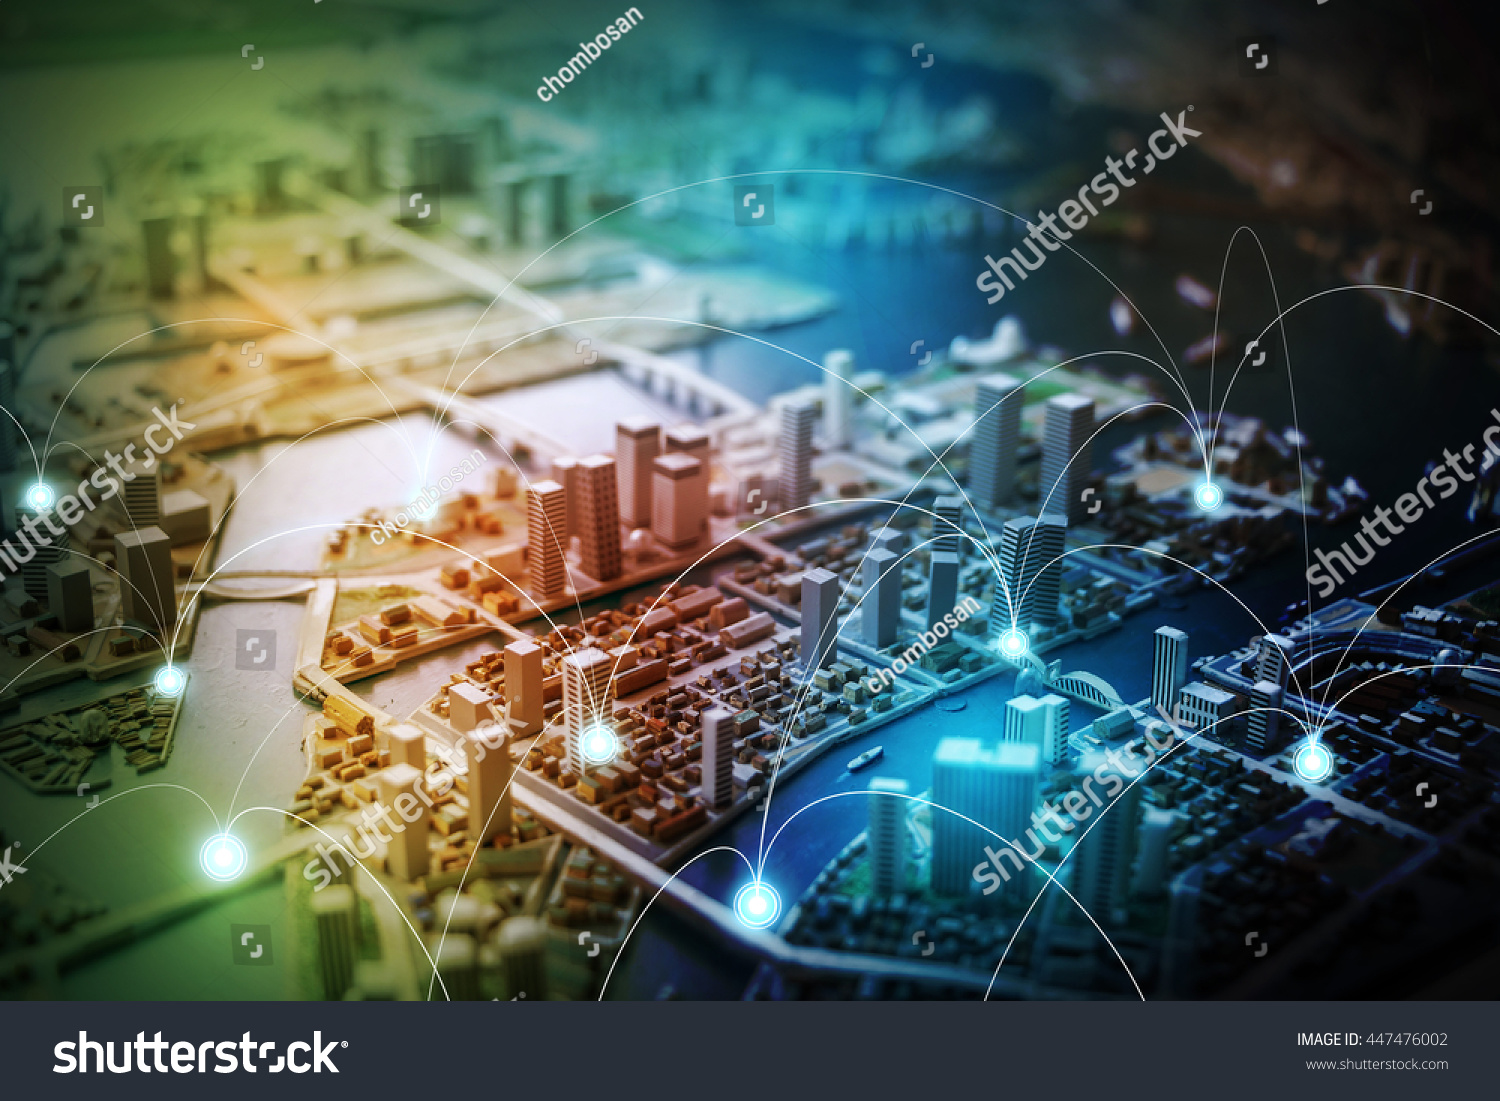 modern city diorama and wireless sensor network, sensor node and connecting line, information communication technology, internet of things, abstract image visual #447476002